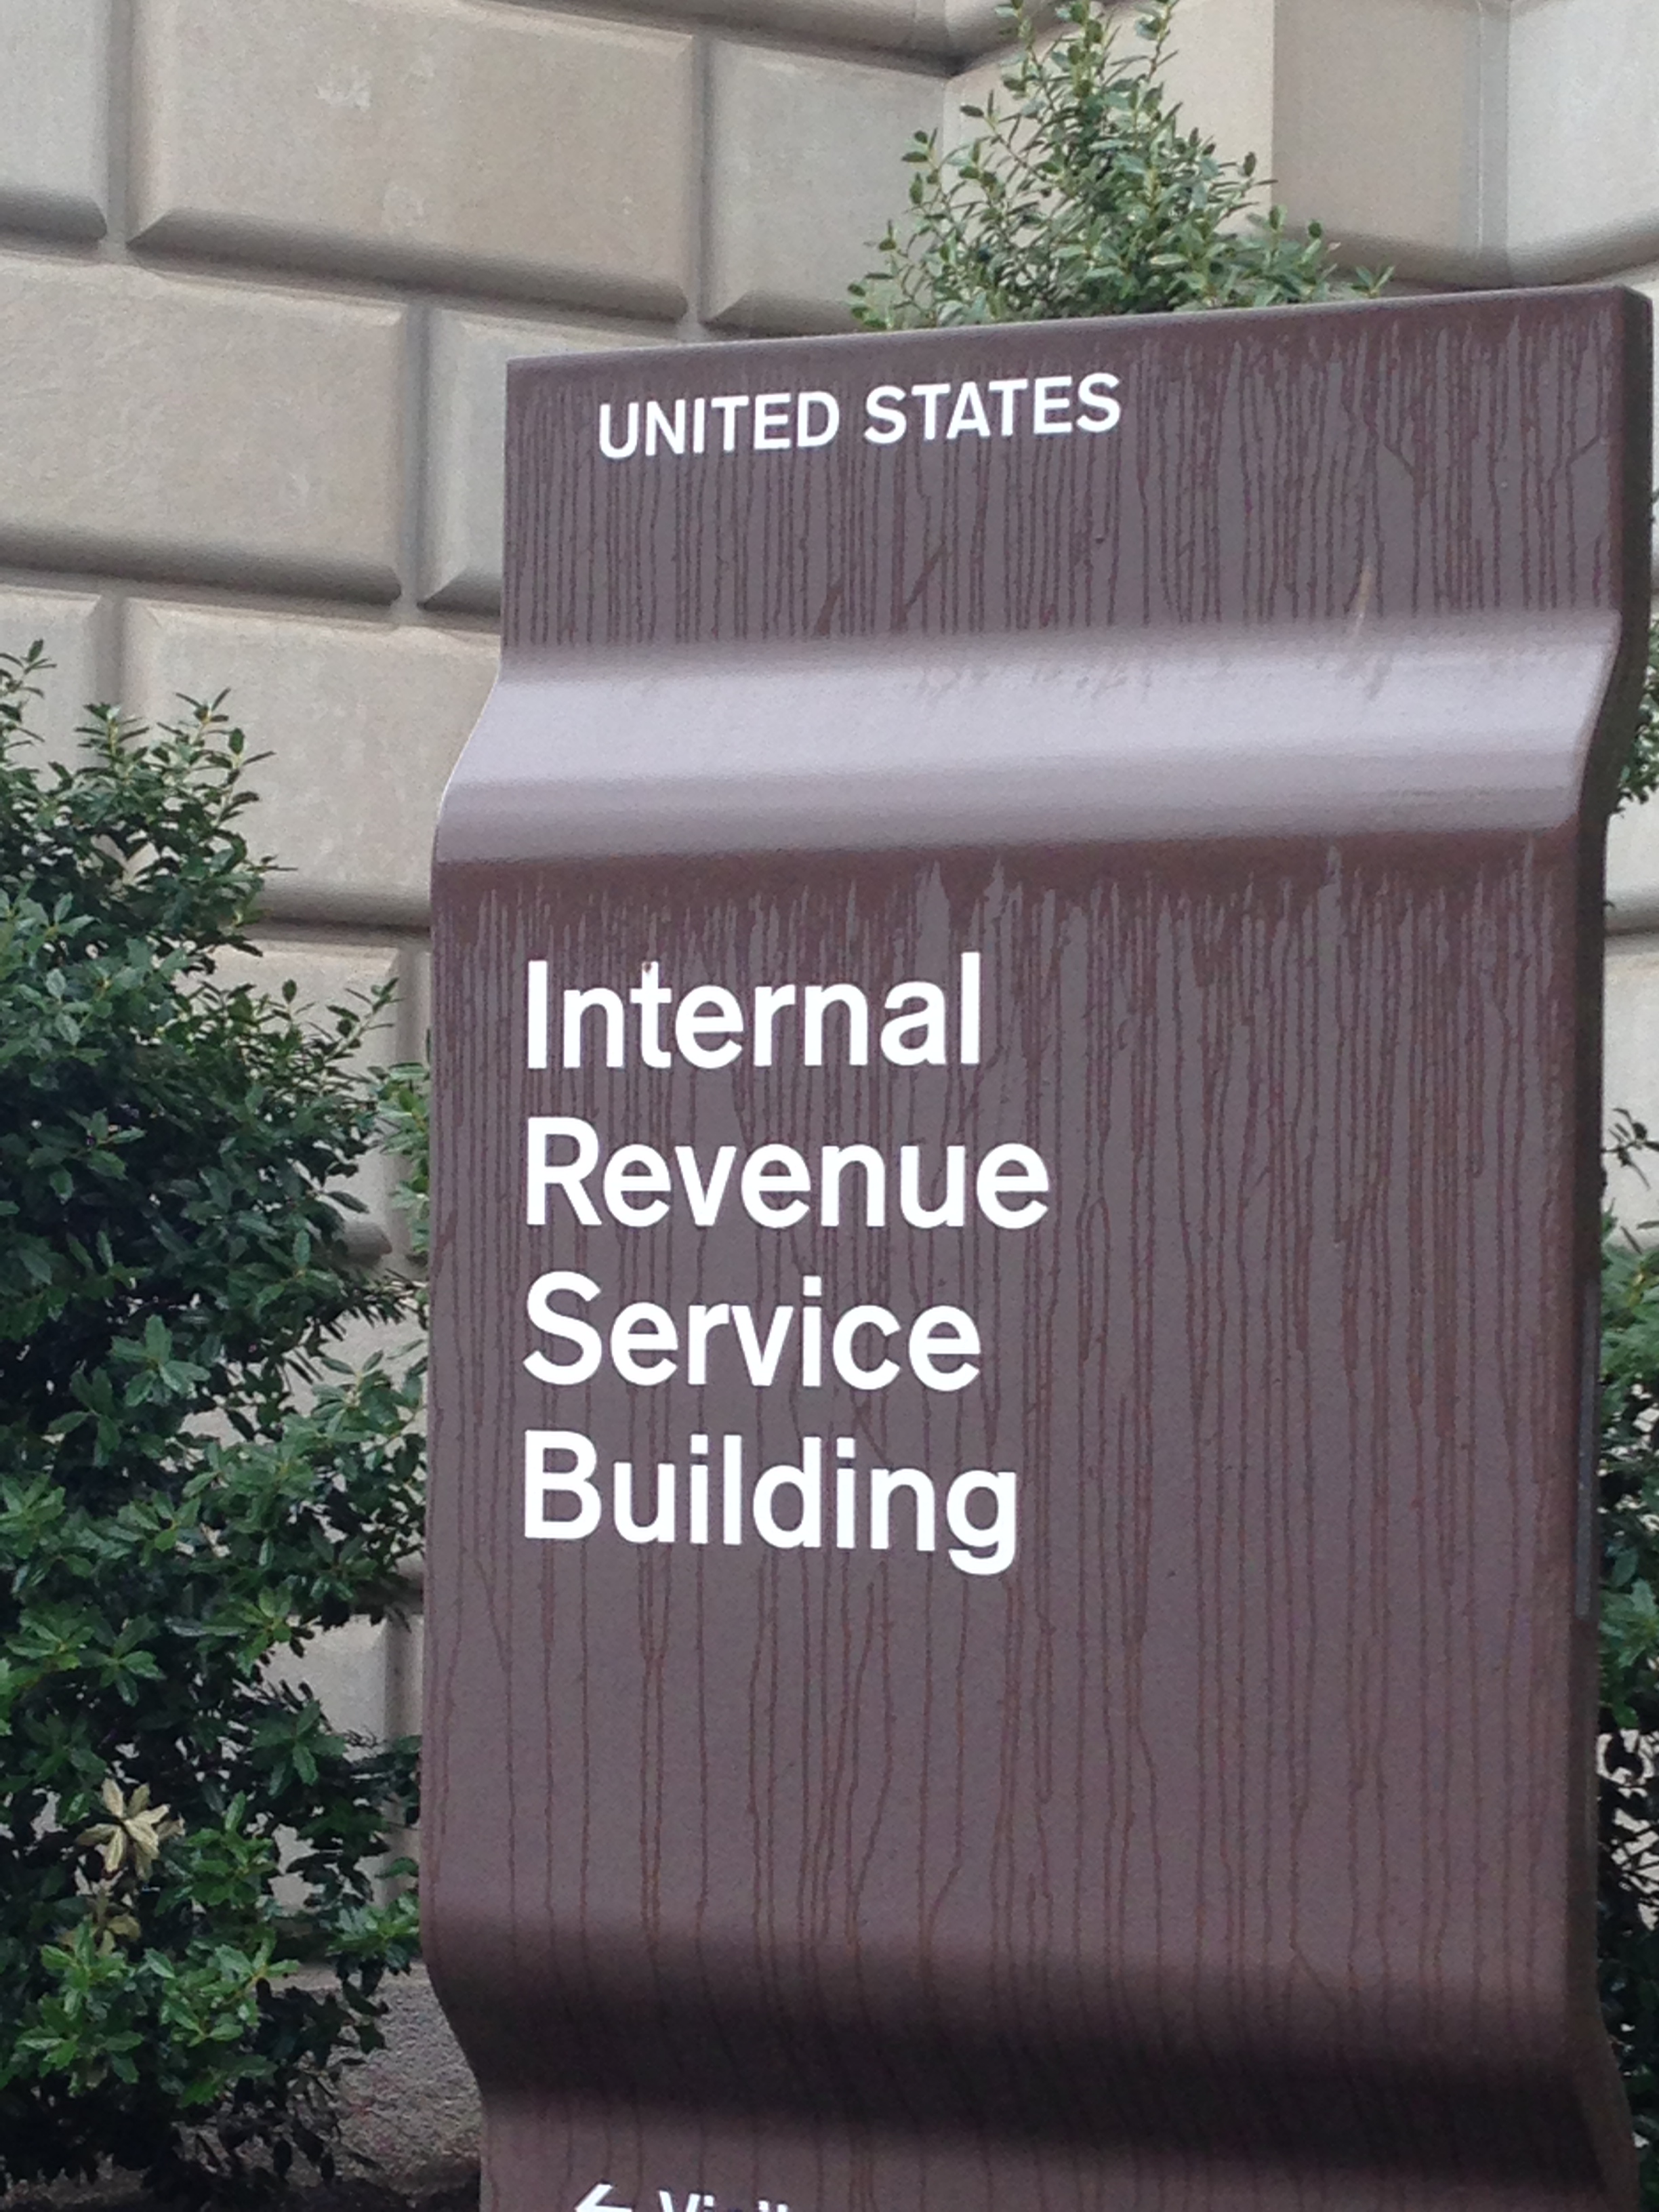 IRS Releases Guidance on Employer Provided Parking & Parking Benefits